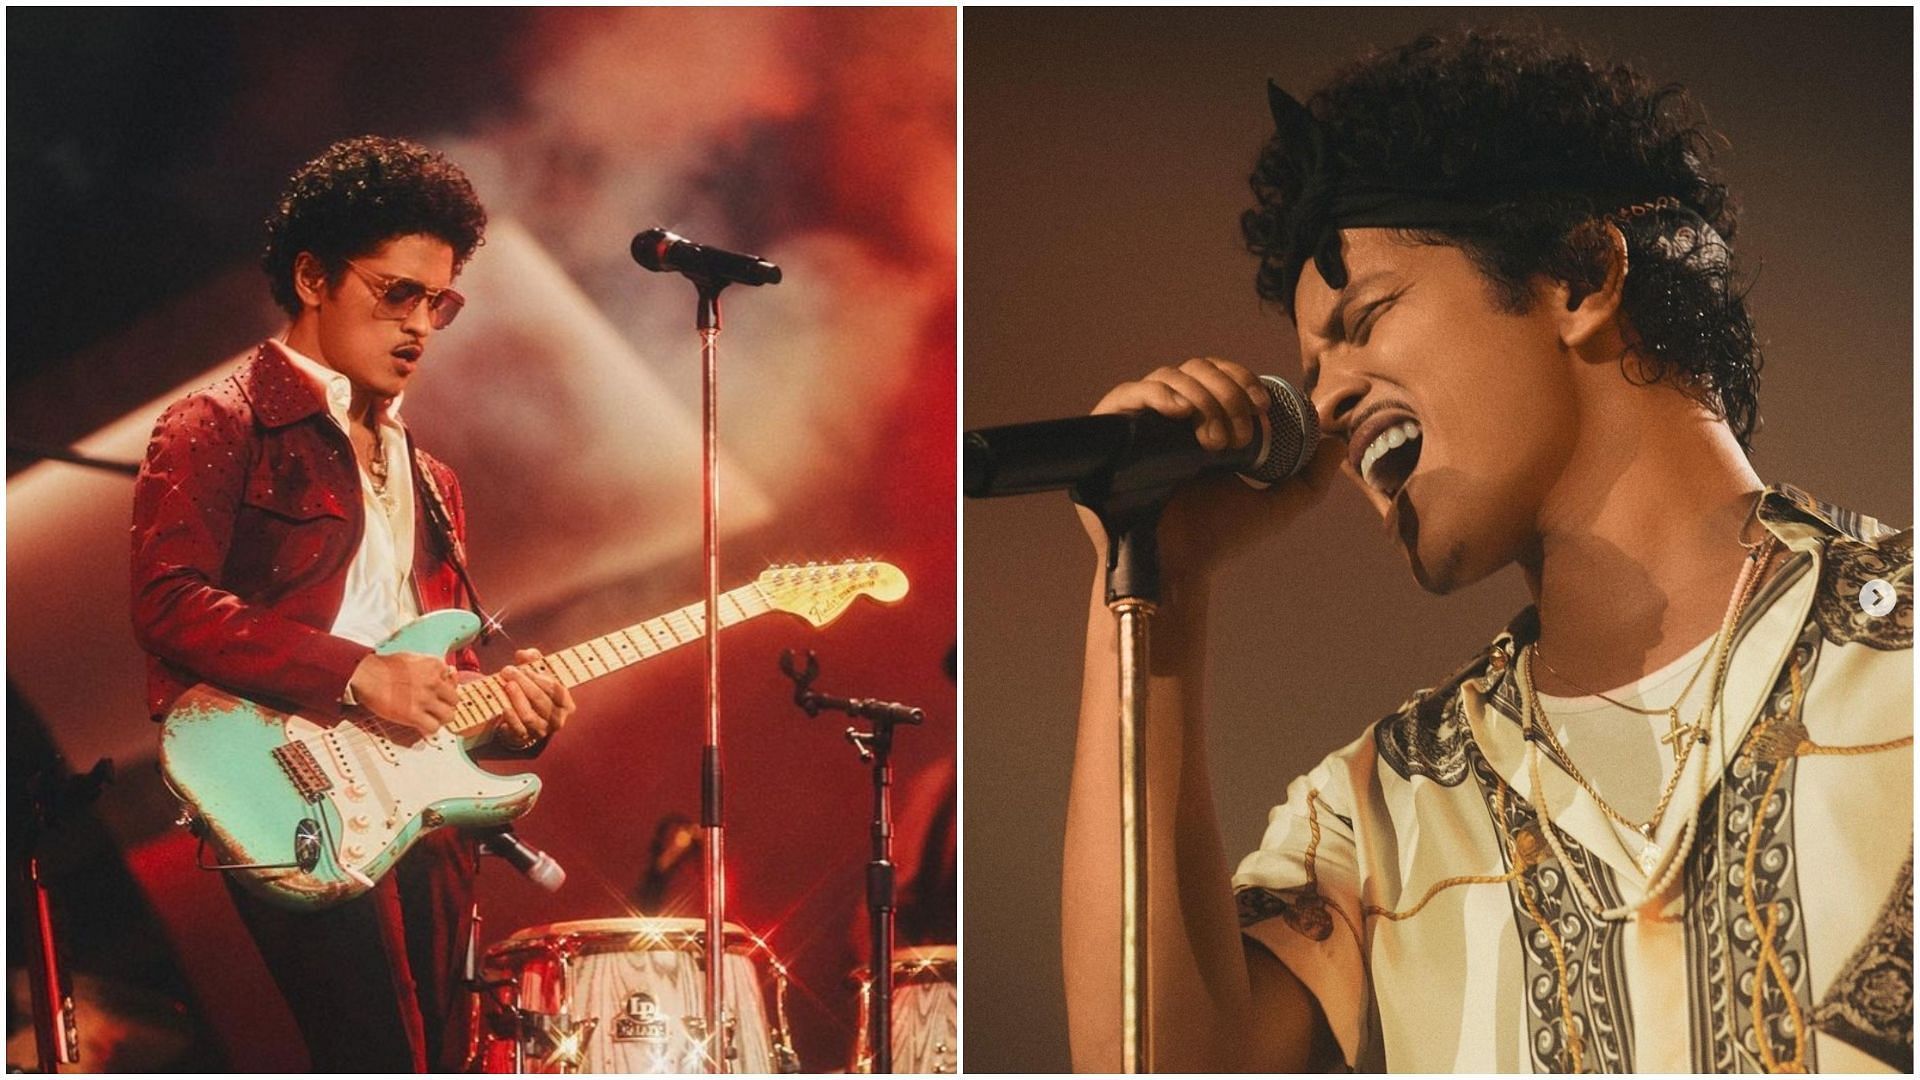 Bruno Mars has announced new dates for his Las Vegas Residency. (Images via Getty)